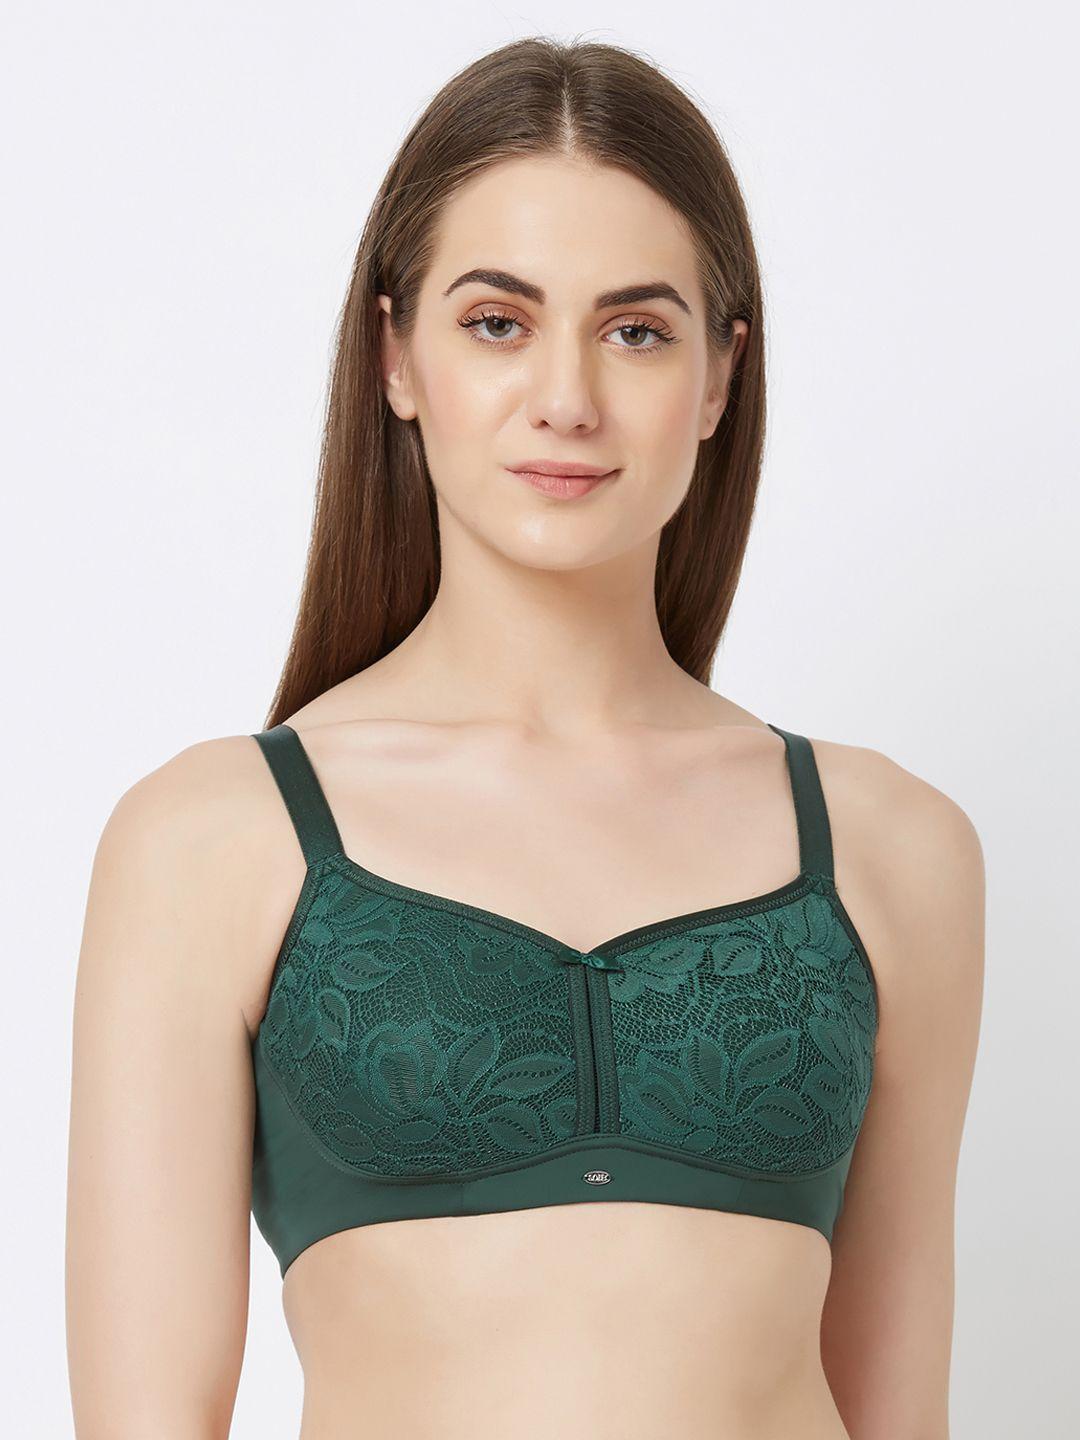 Soie Green Lace Non-Wired Non Padded full coverage Everyday Bra FB-705